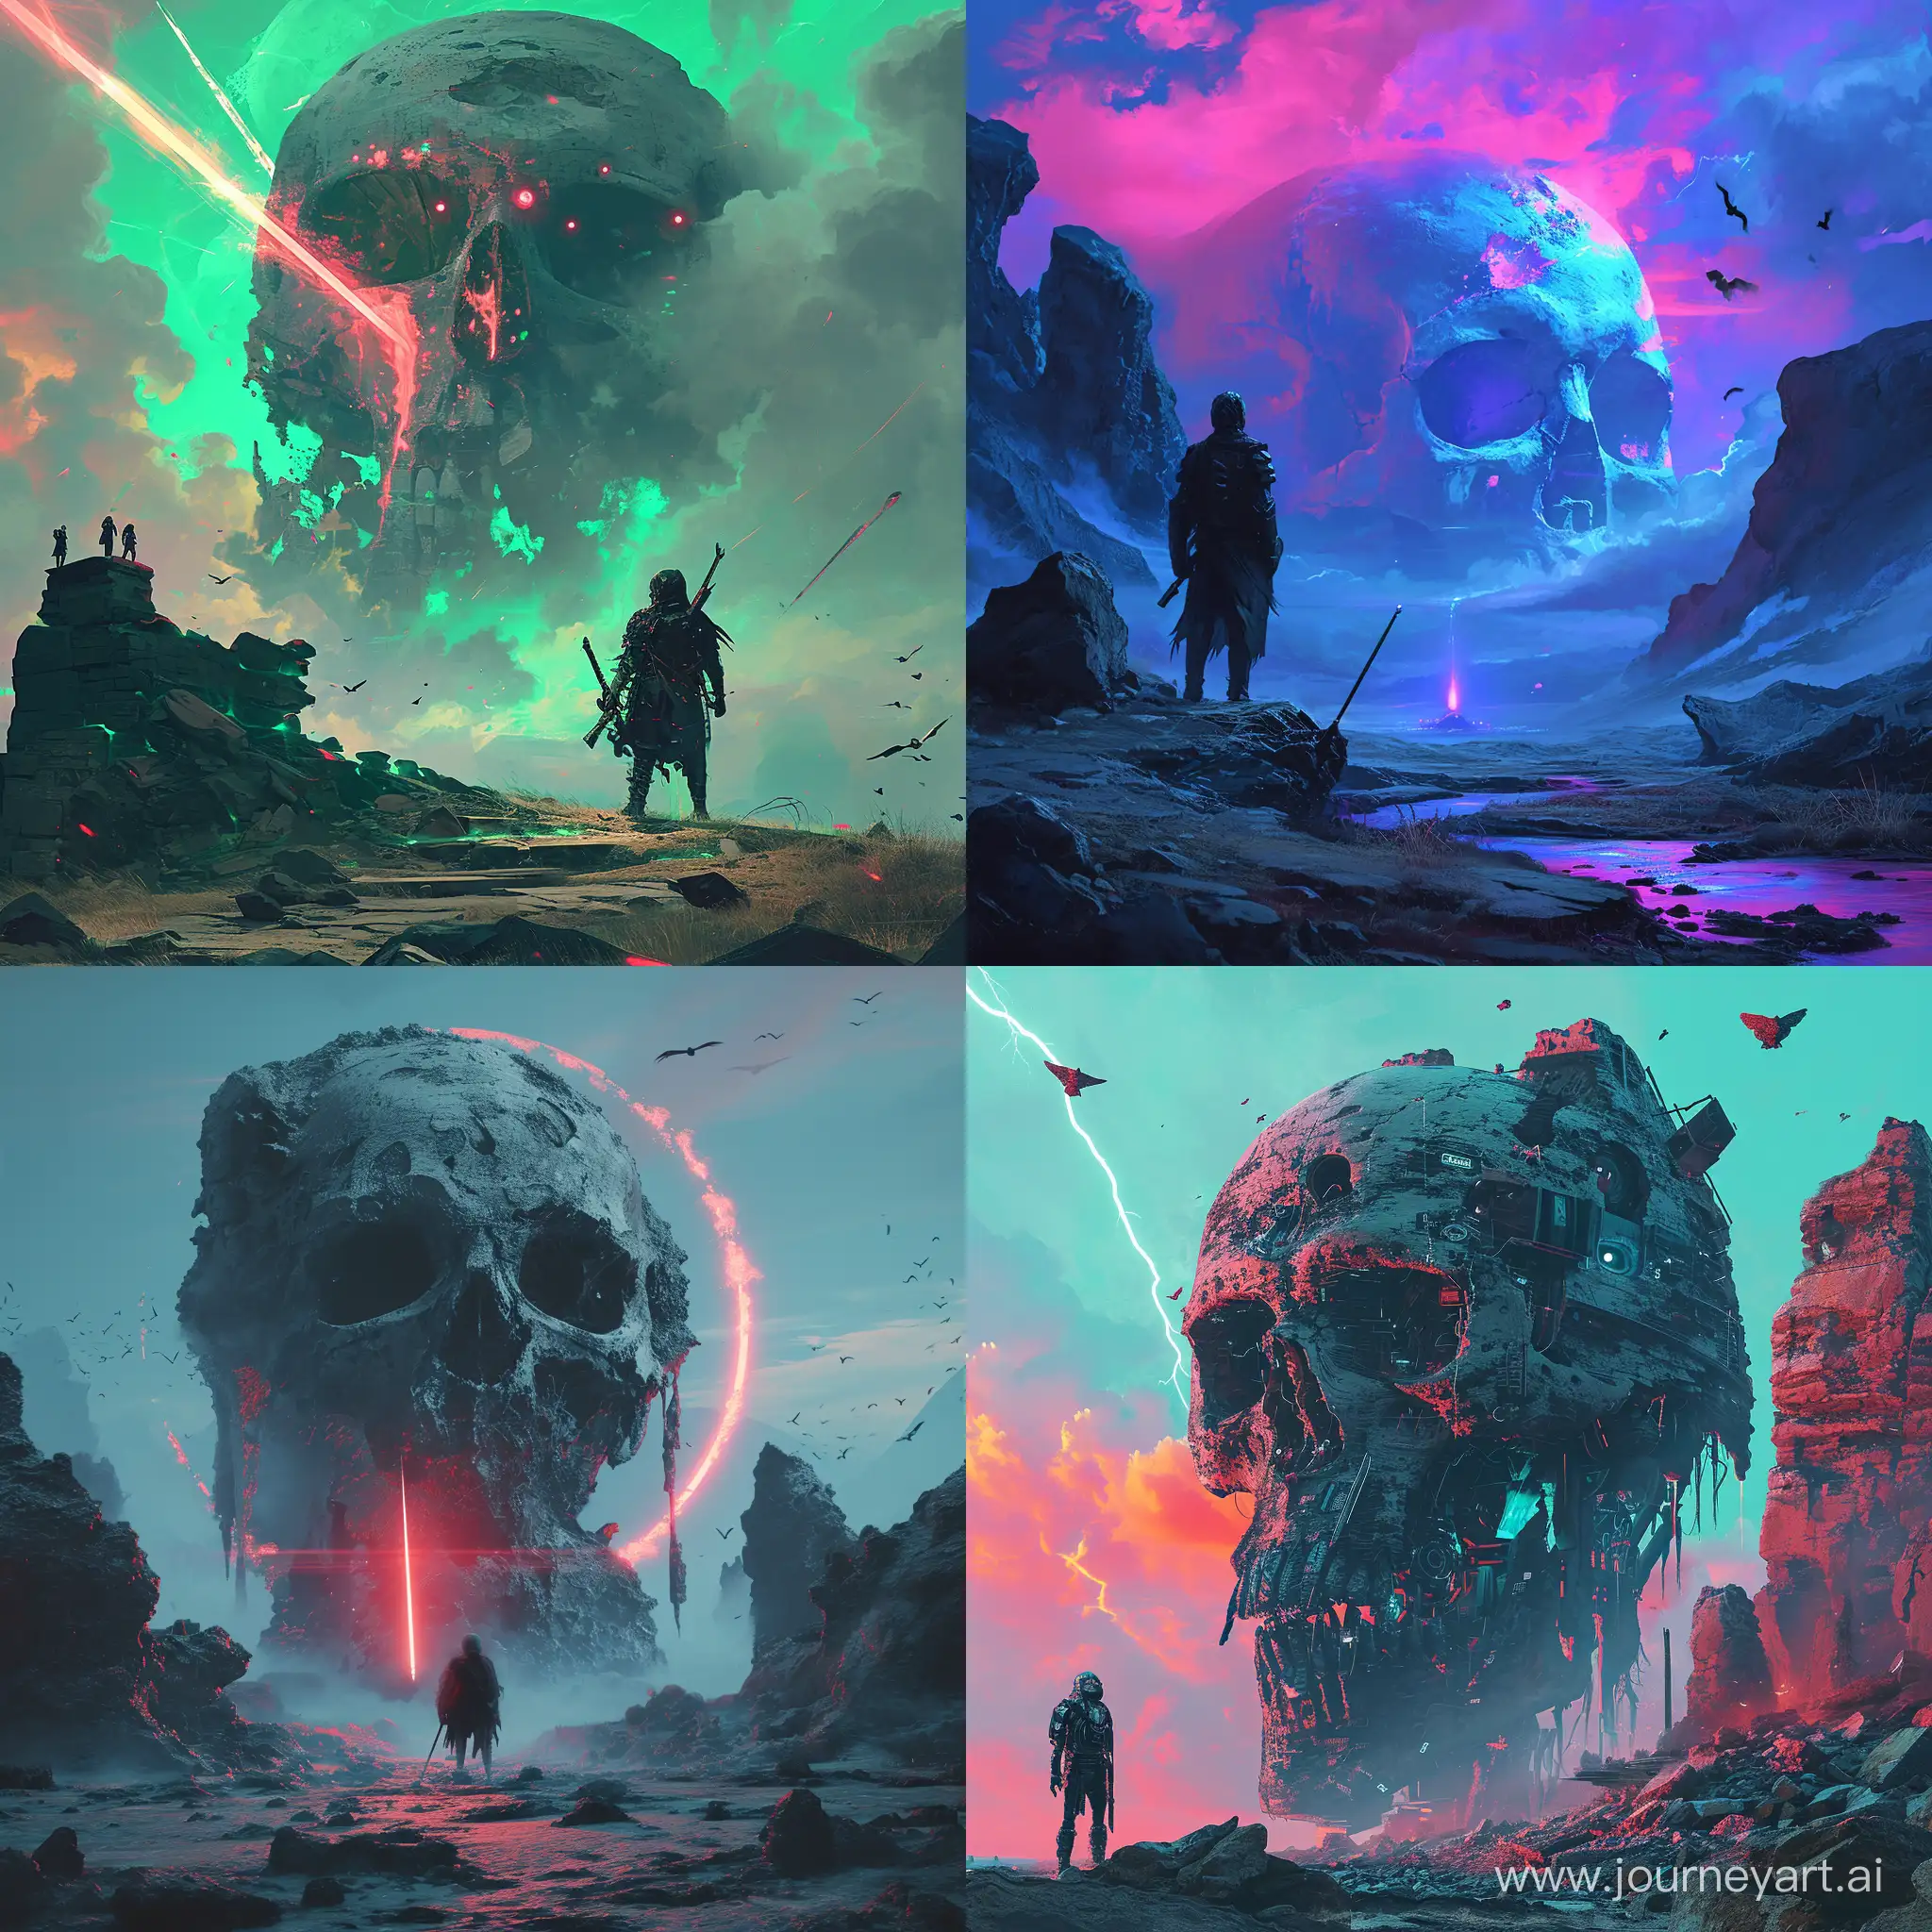 hologram, ::2. A warrior stands in a desolate land with a giant skull looming above them. The warrior is equipped with a sword and shield, there is a skull with glowing eyes in the background. The scene is set at dusk, there are crows flying around, Hologram, высокое разрешение, высокая чёткость, чёткое изображение, микро детализация, высокая детализация, ультра реализация, максимальная детализация, много деталей, глубокие детали, детальное изображение, четкие линии. --v 6